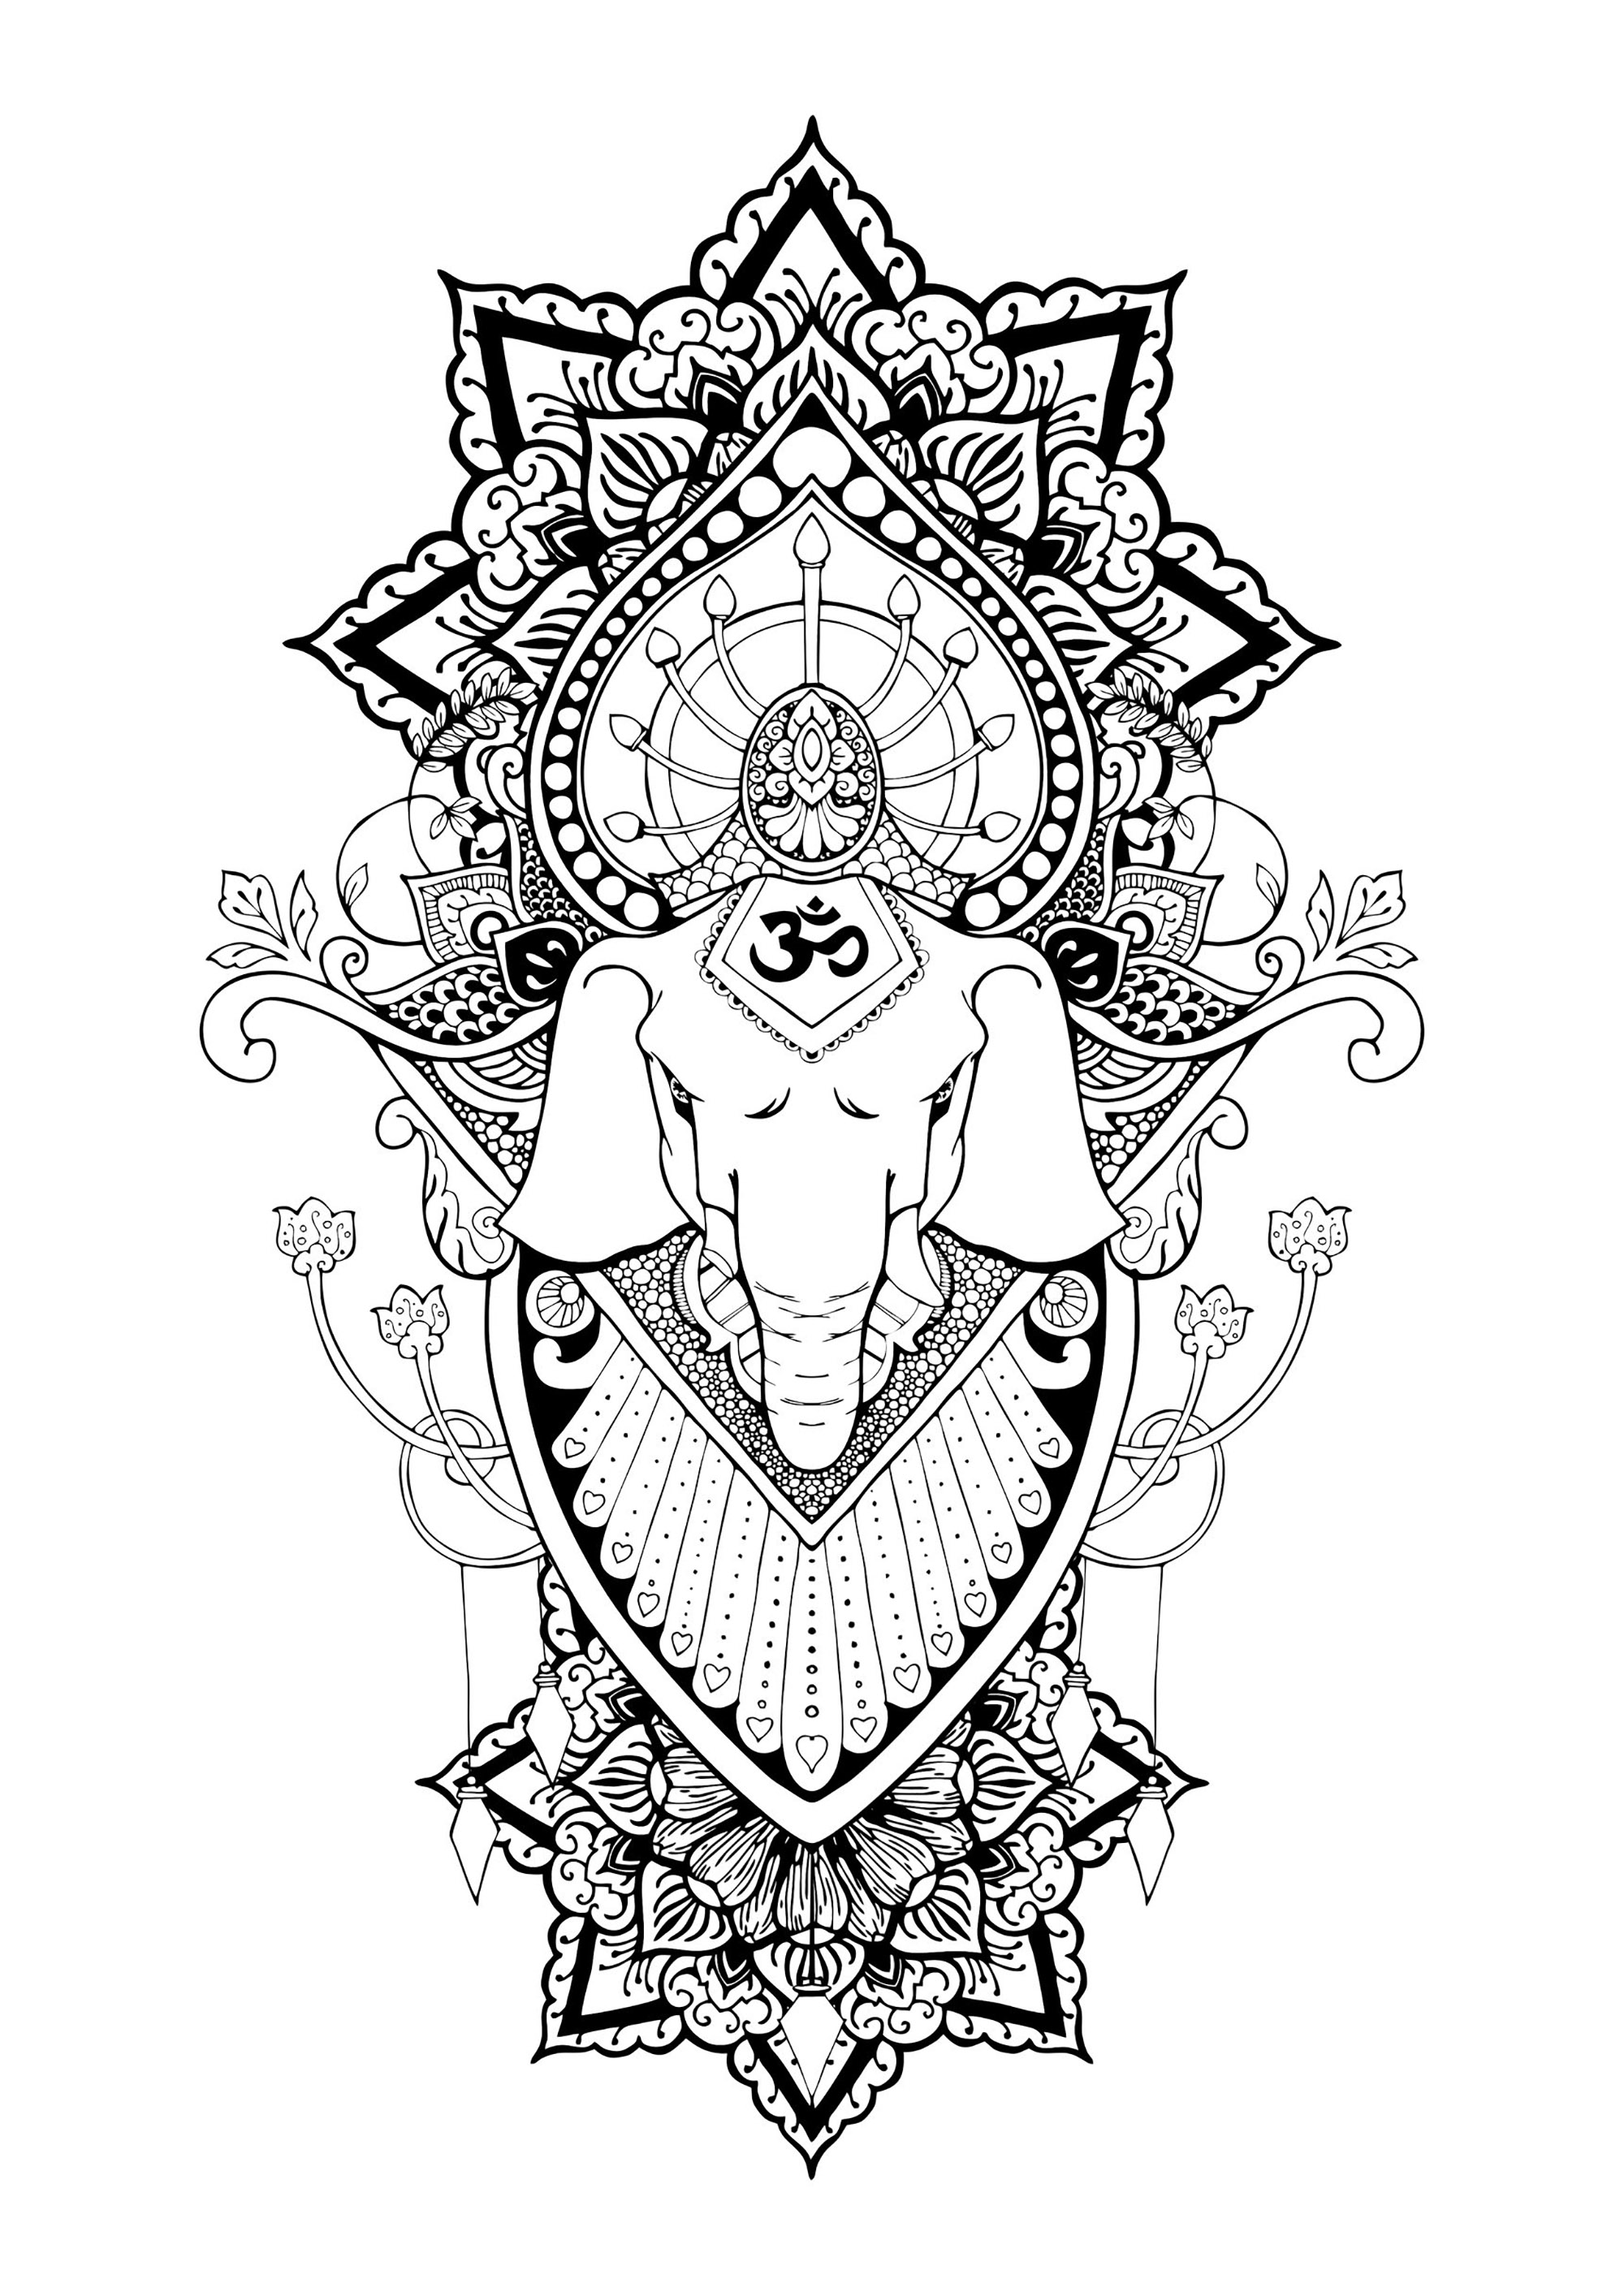 Ganesha is one of the best-known and most worshipped deities in the Hindu pantheon. .  In this coloring page, only his head is represented, with beautiful mandalas and elegant patterns, Source : 123rf   Artist : Chic2view